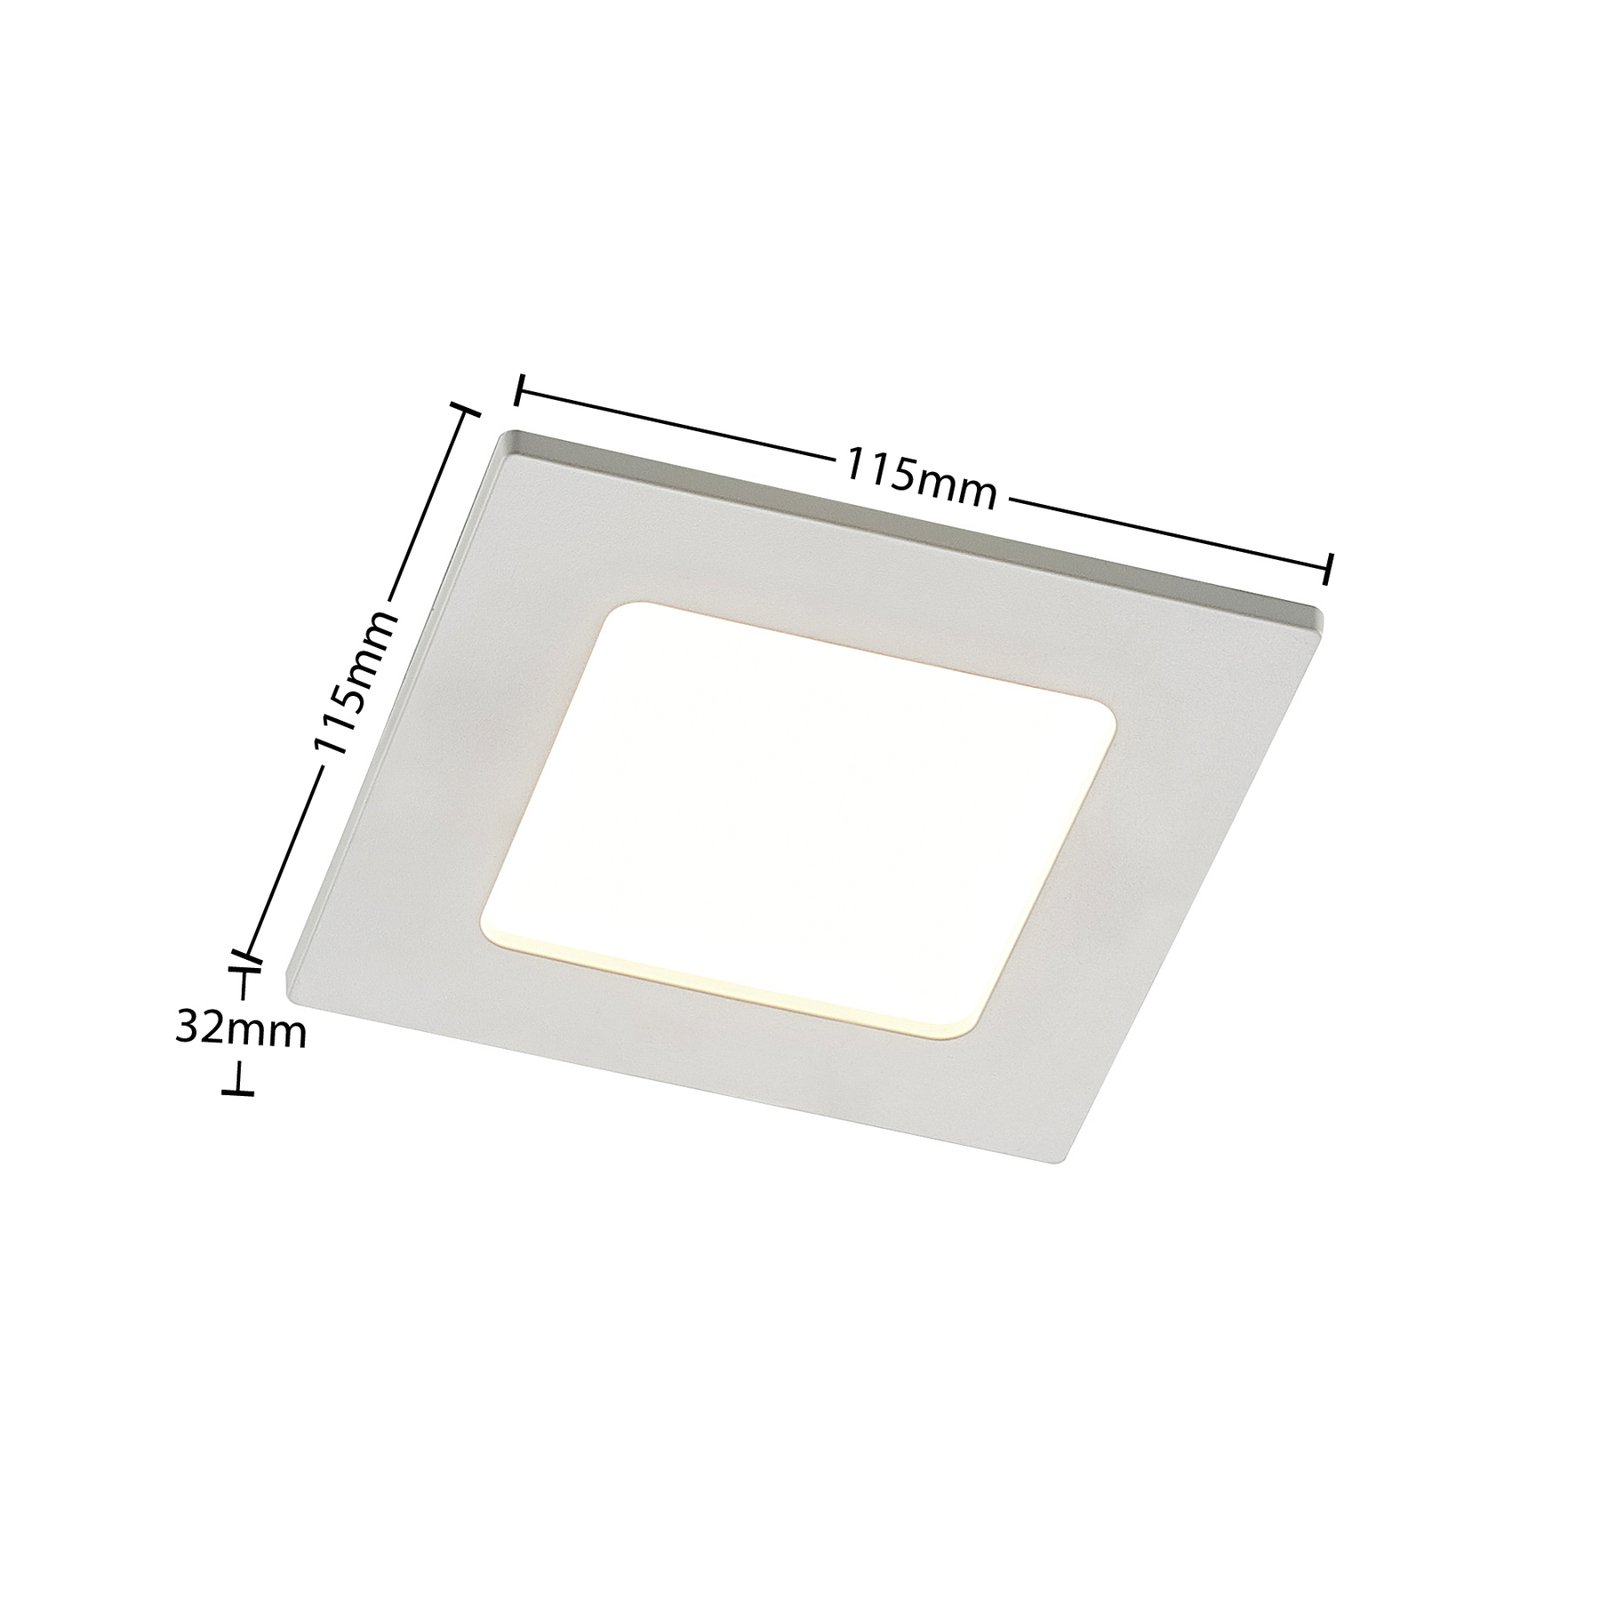 Prios LED recessed light Helina, white, 11.5 cm, dimmable